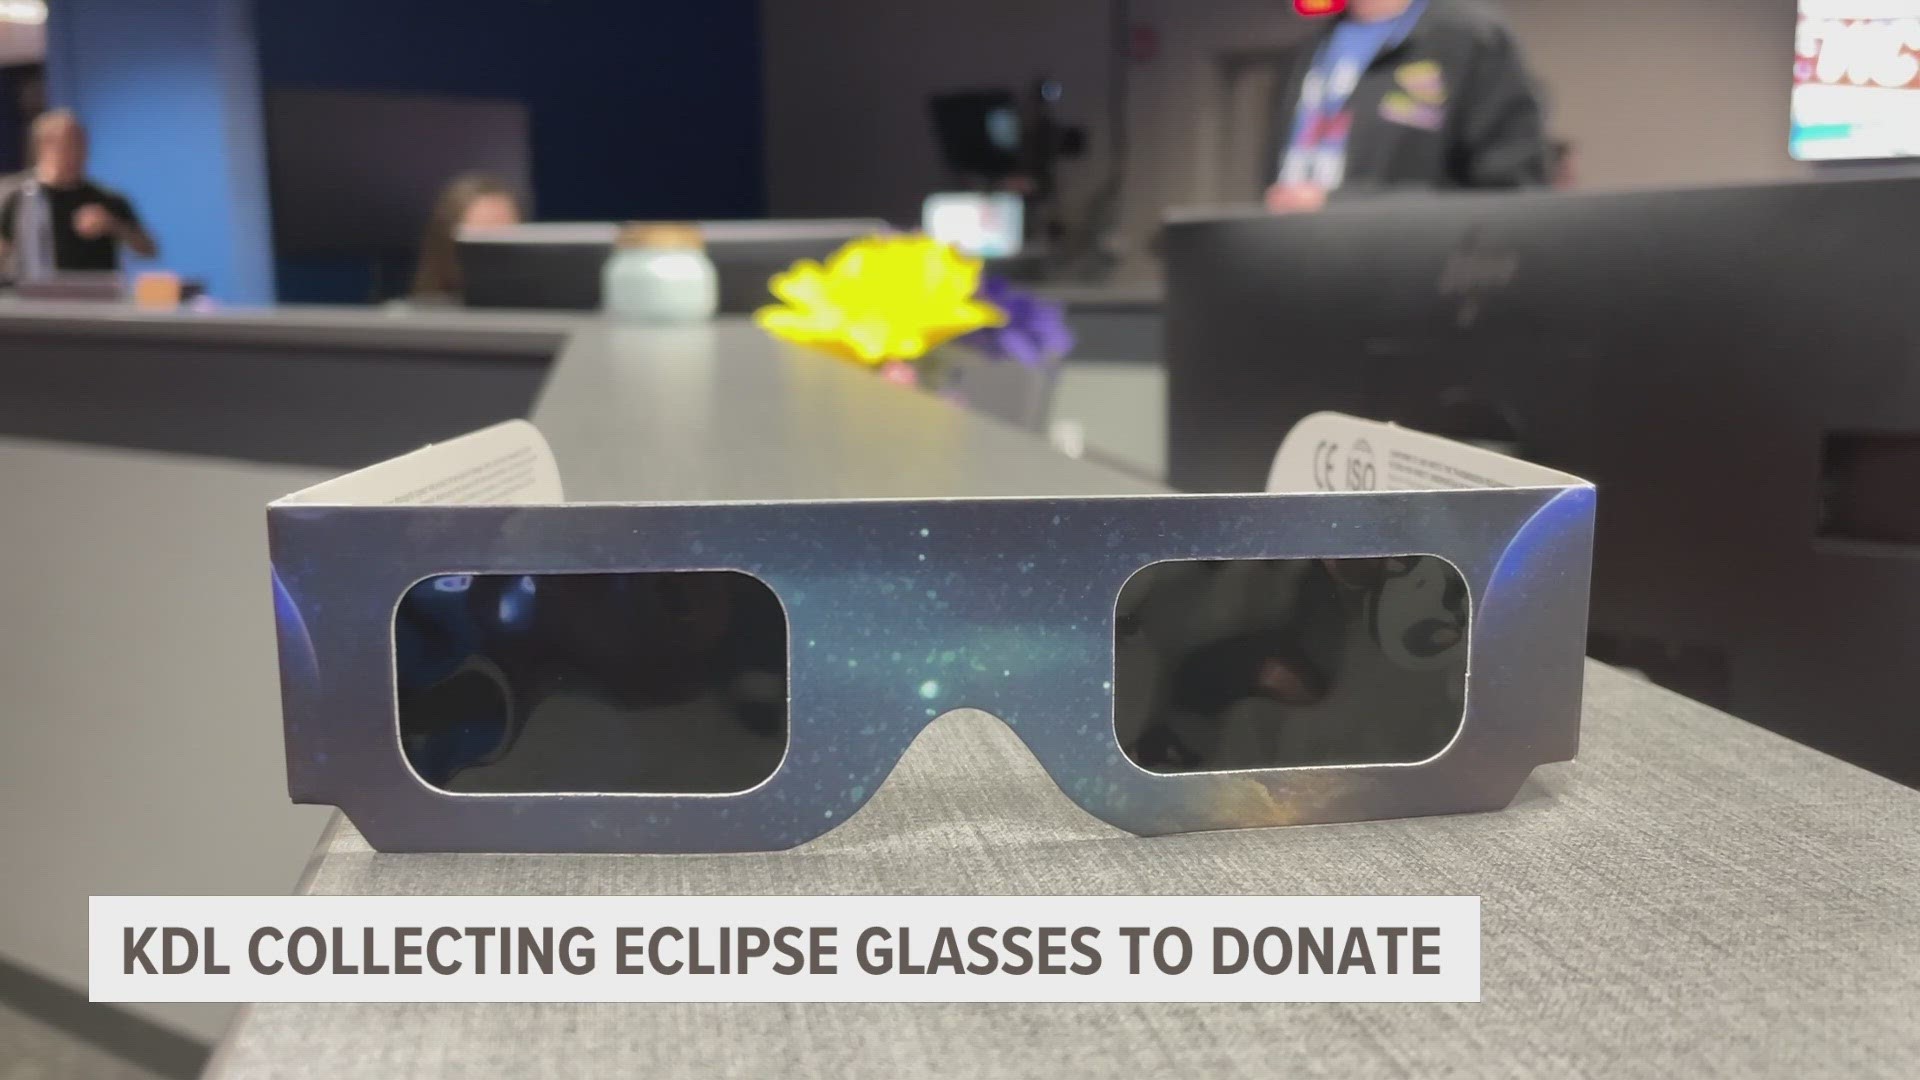 You can bring your solar eclipse glasses to any KDL branch until Earth Day (April 22). The library will donate them.